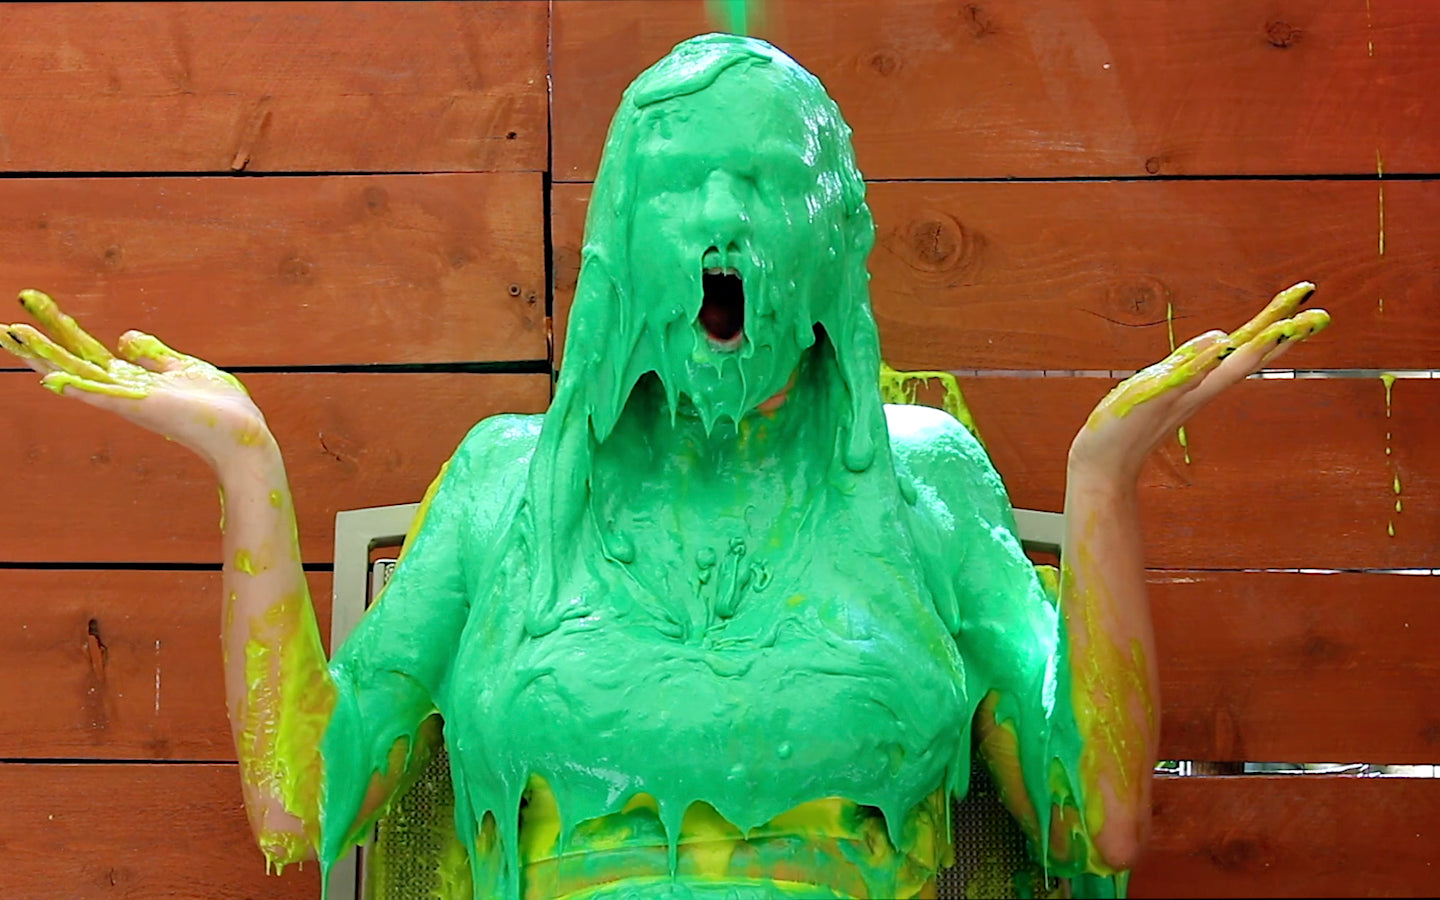 The Slime Spa "Jules"